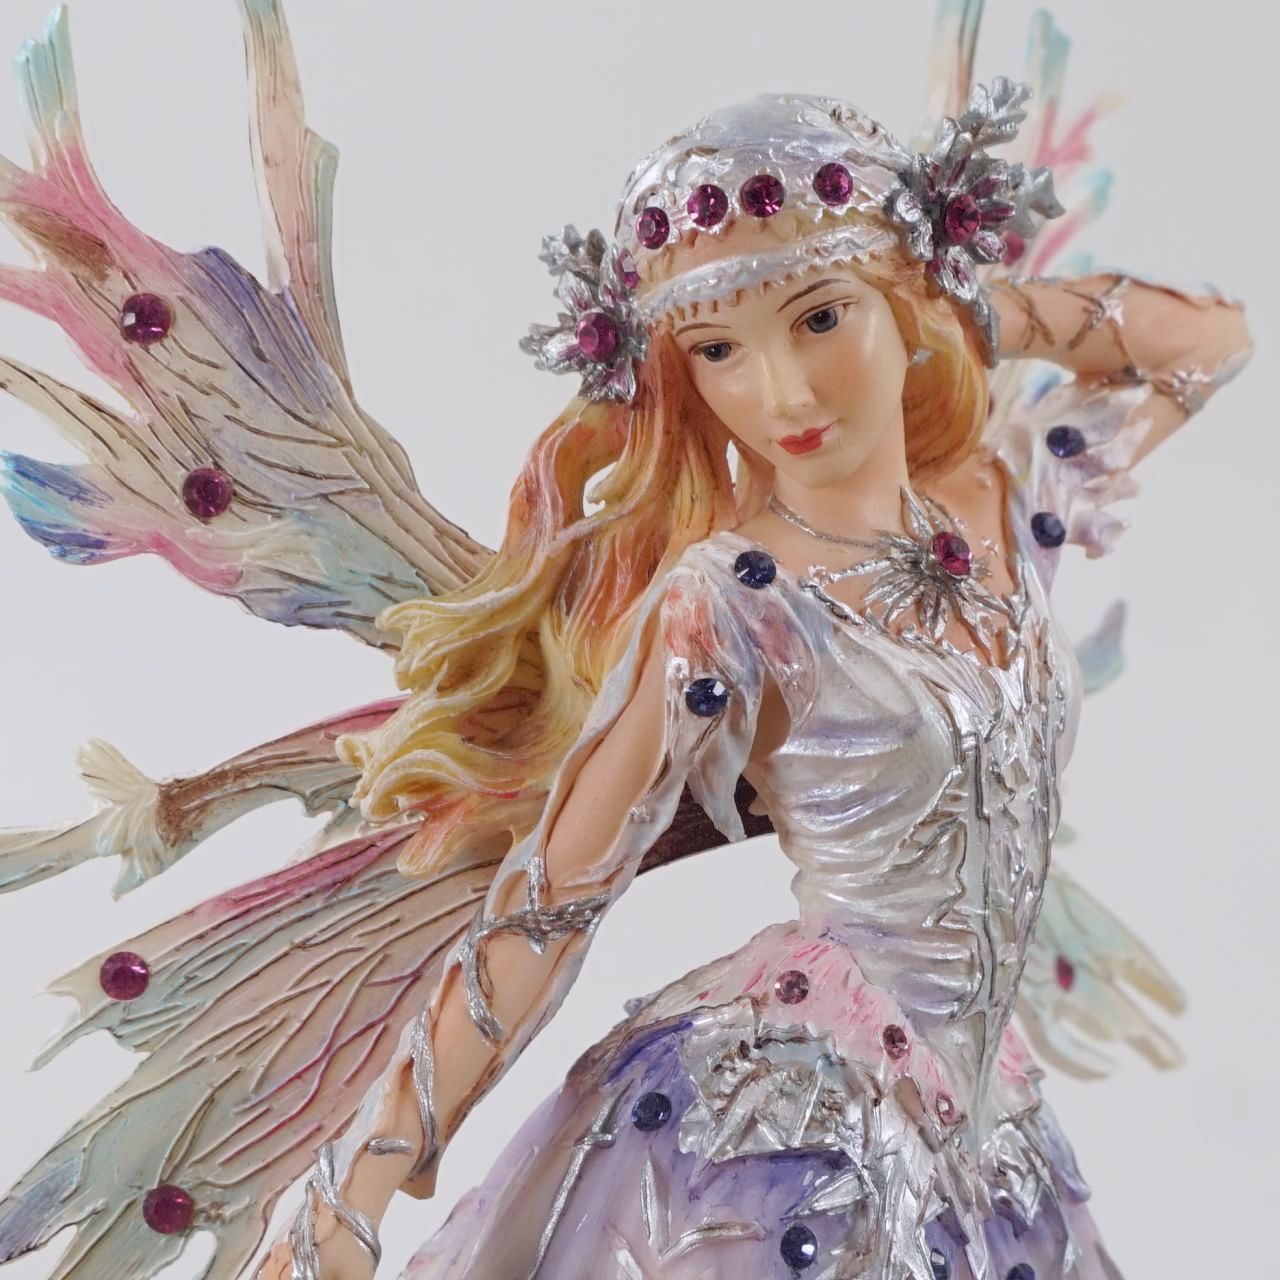 Crisalis Collection★ Ice Princess Faerie (1-5384) 10% OFF